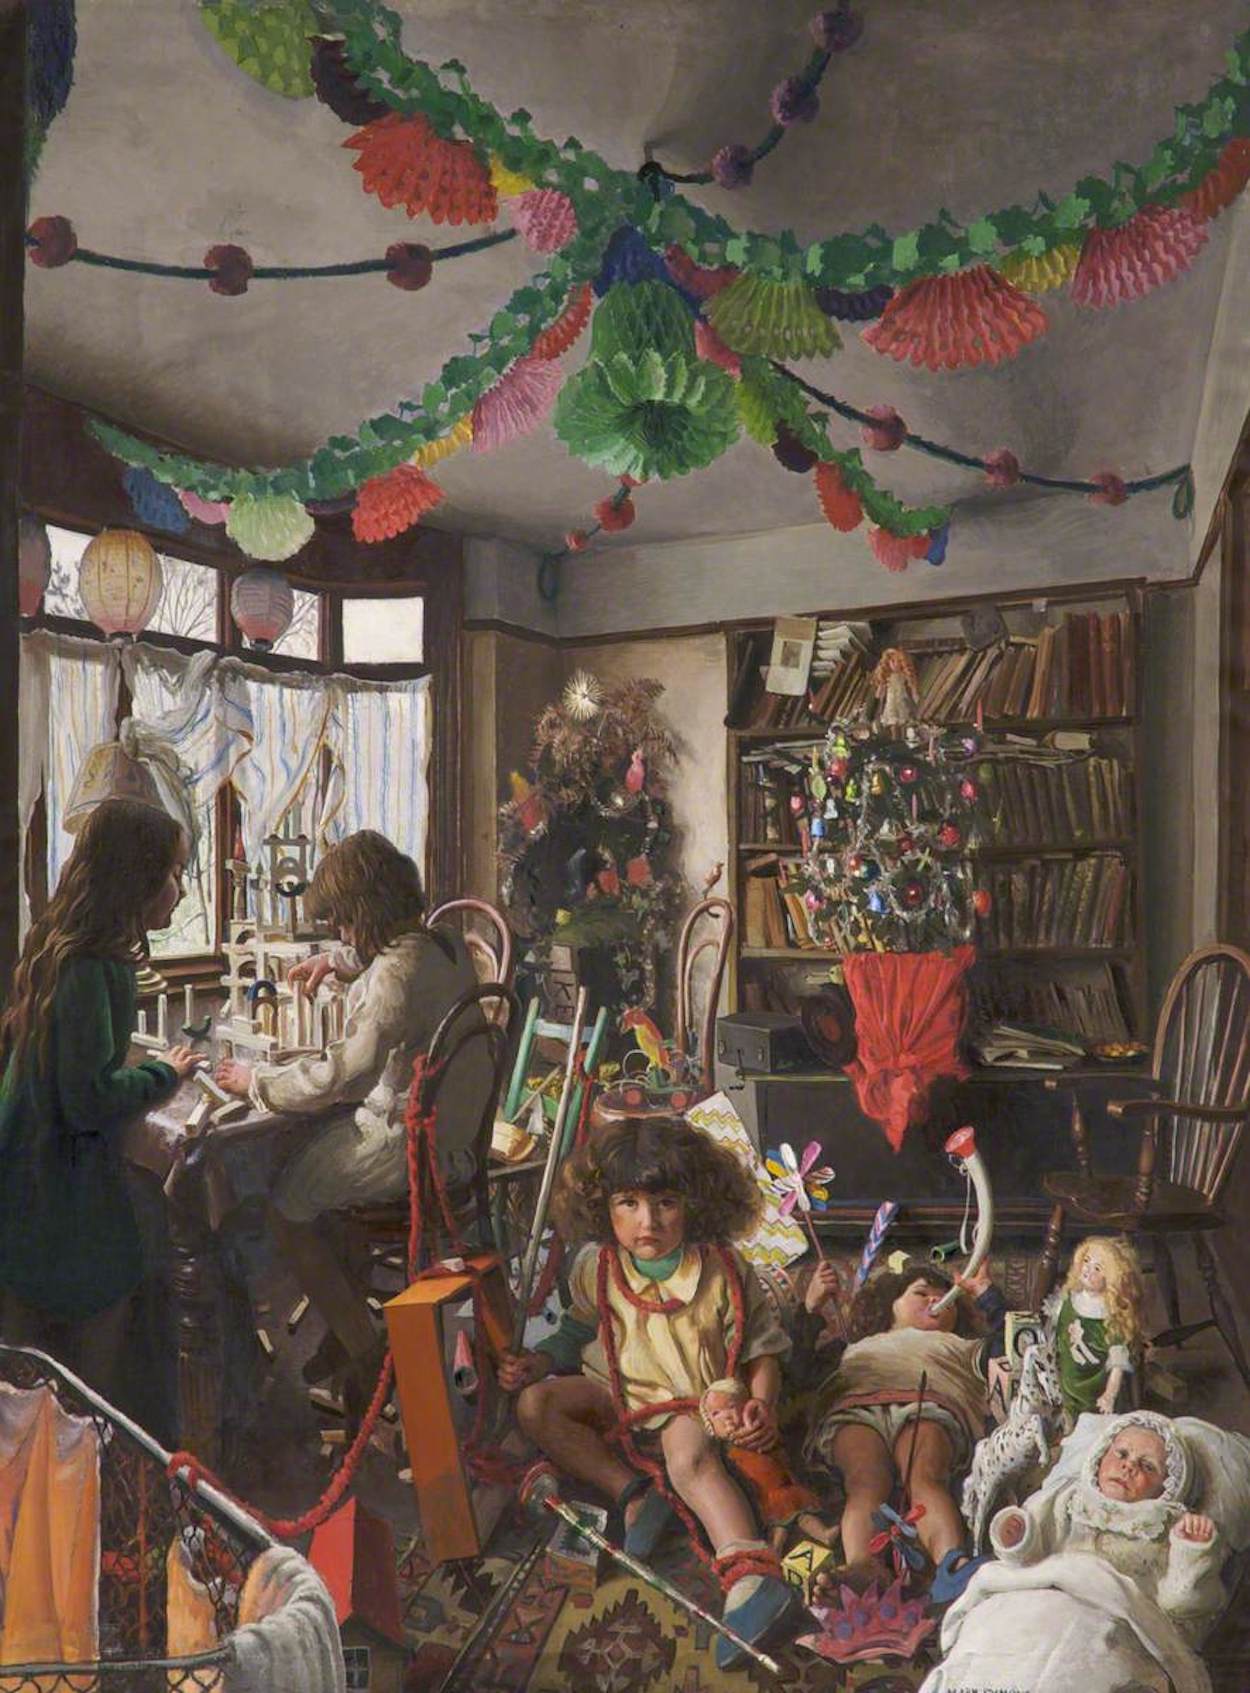 The Day after Christmas by Mark Lancelot Symons - c. 1931 - 91 x 68 cm Bury Art Museum